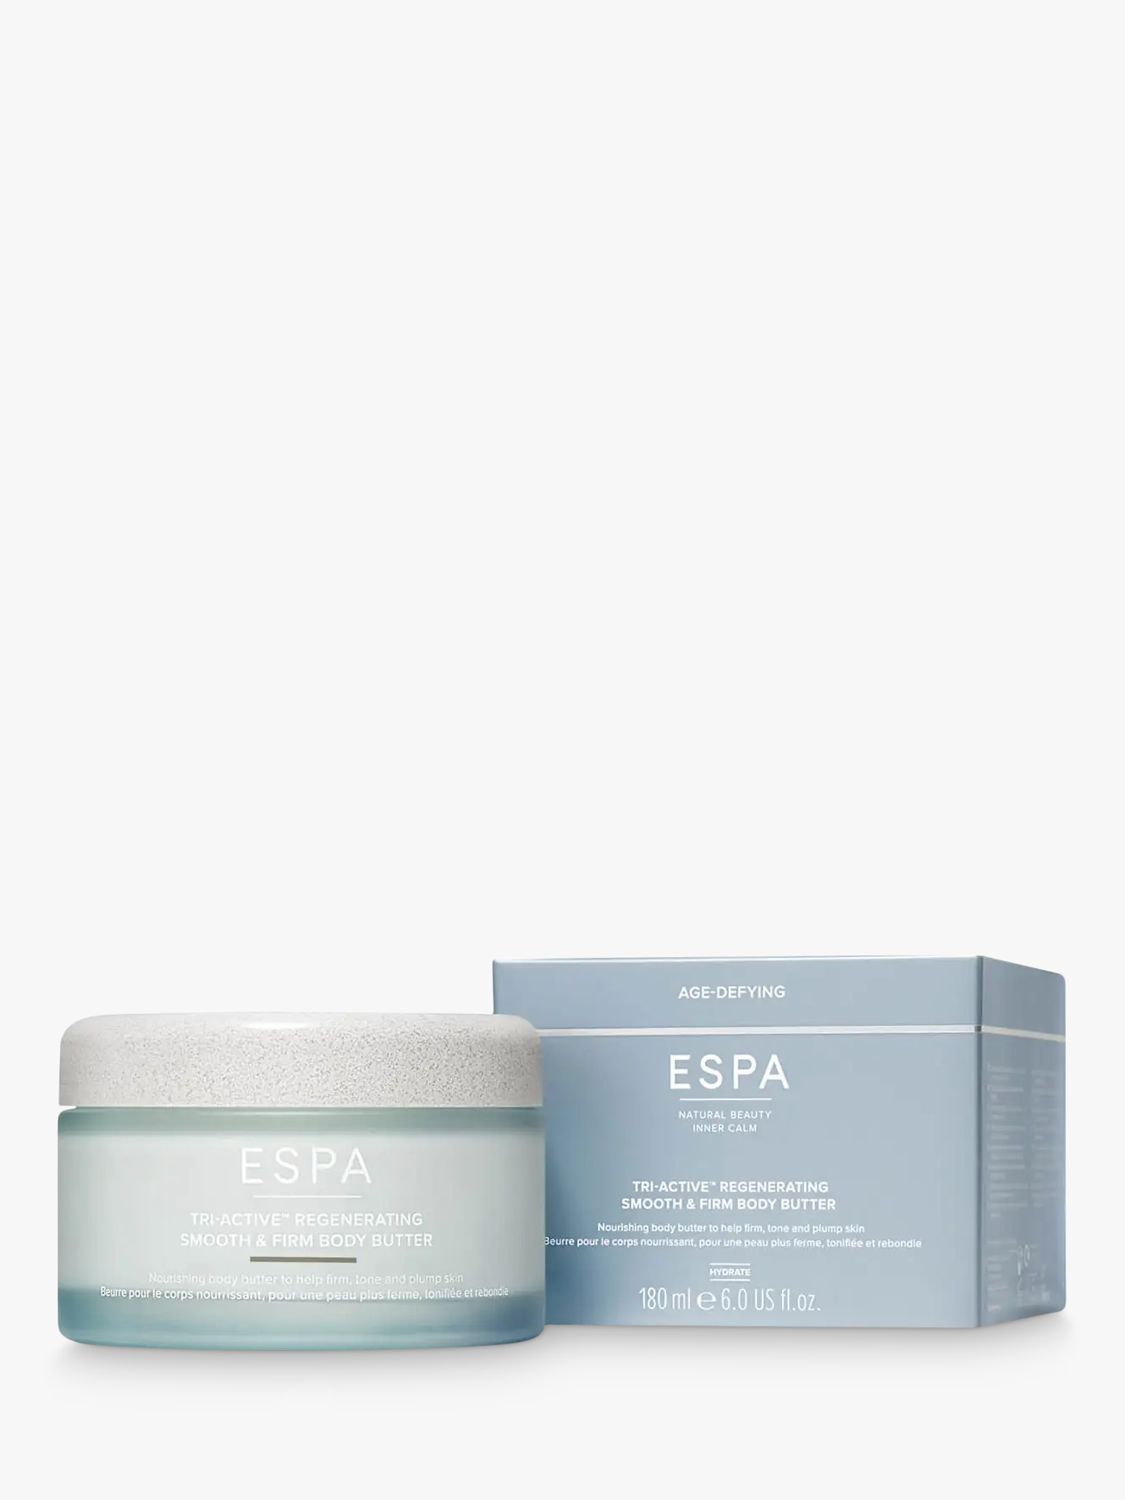 ESPA Tri-Active Regenerating Smooth & Firm Body Butter, 180ml 2